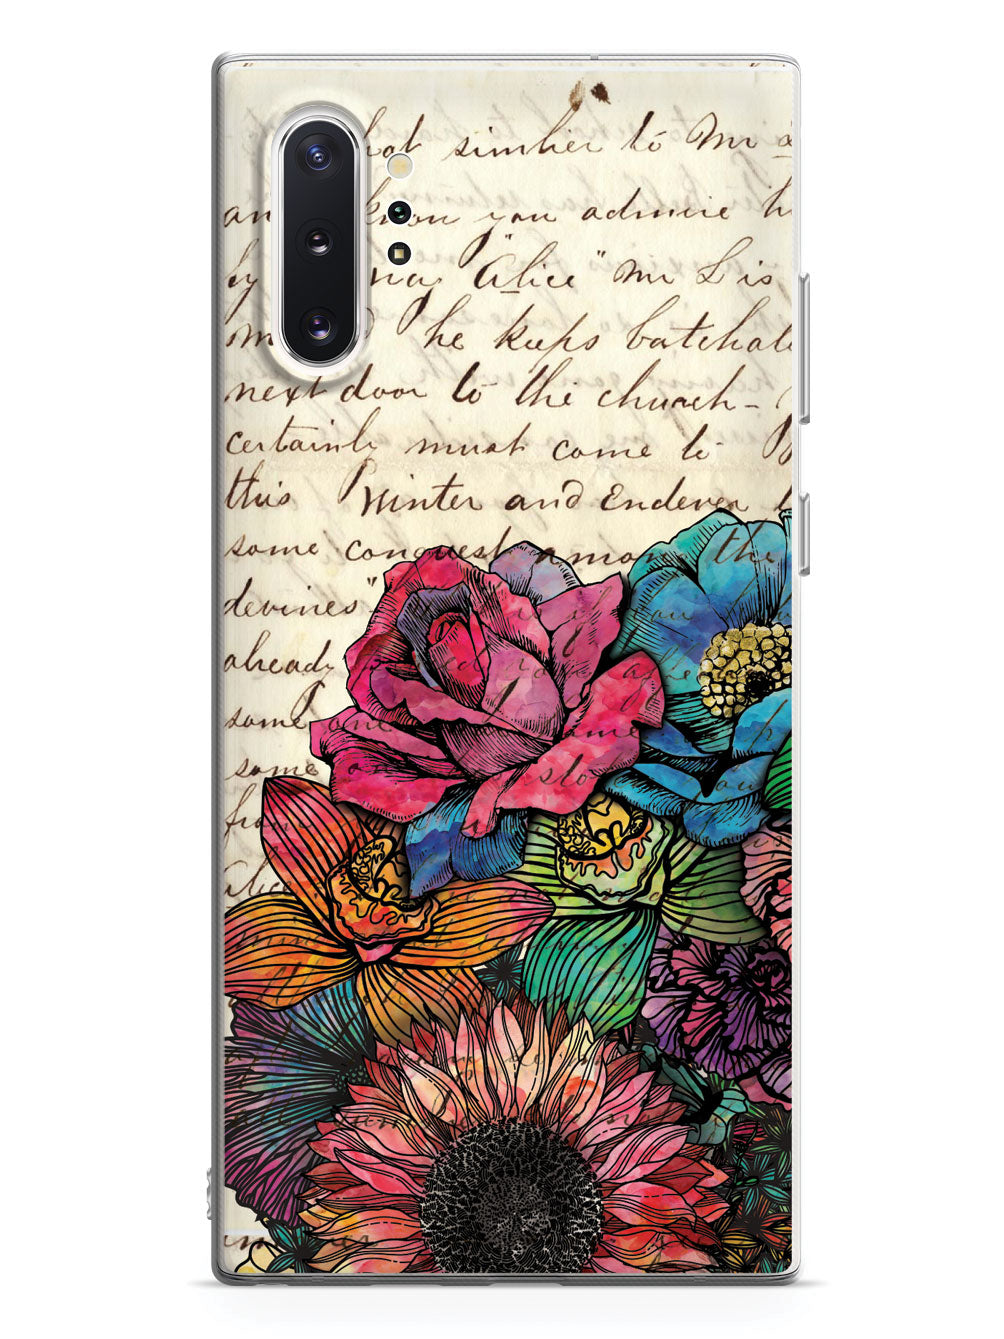 Vintage Handwritten Letter and Flowers Case